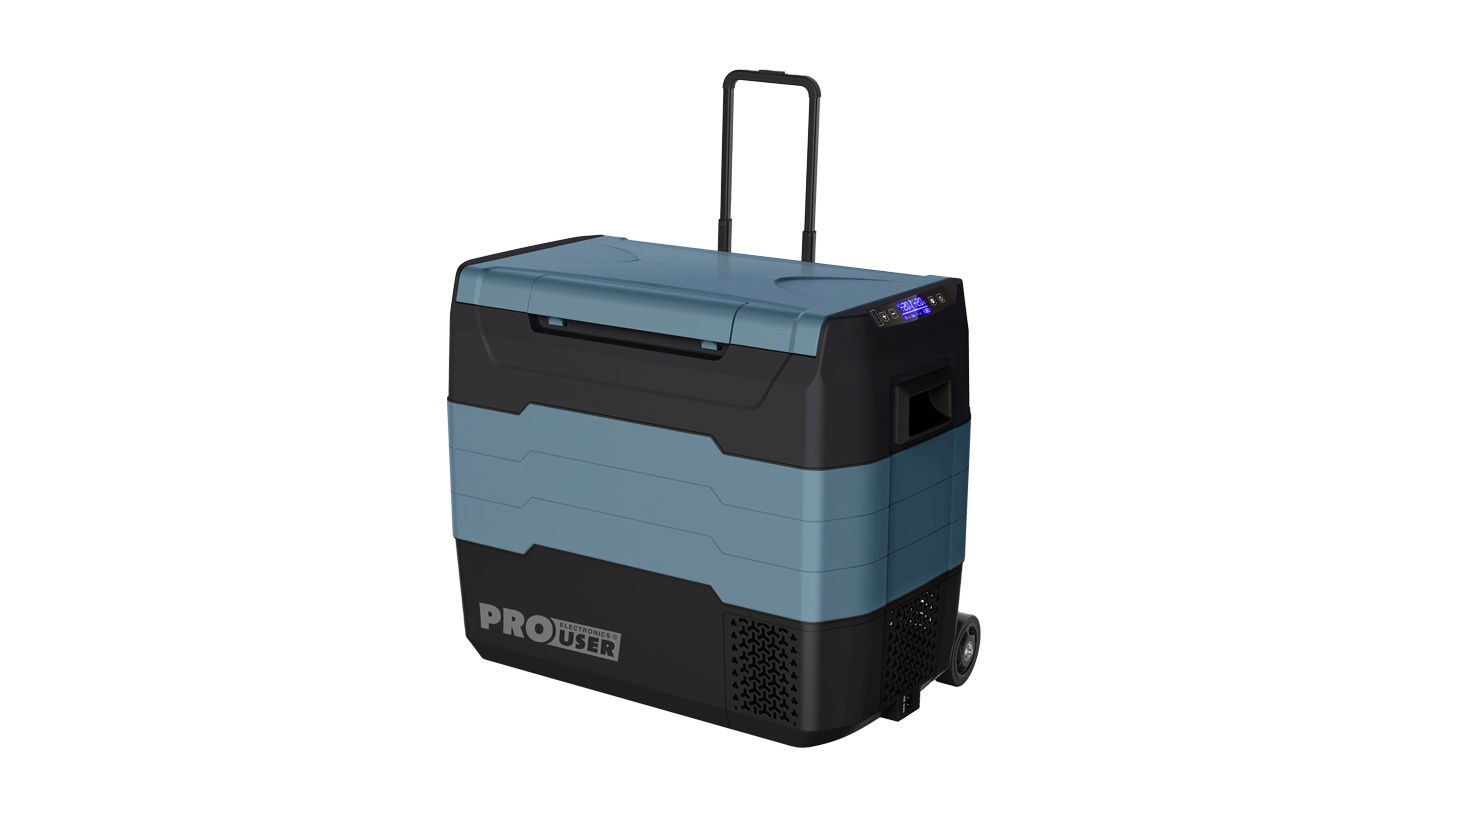 Cooler box - Pro-user CoolX 50
<br /><b style=color:green>DISPONIBILE A BREVE</b>